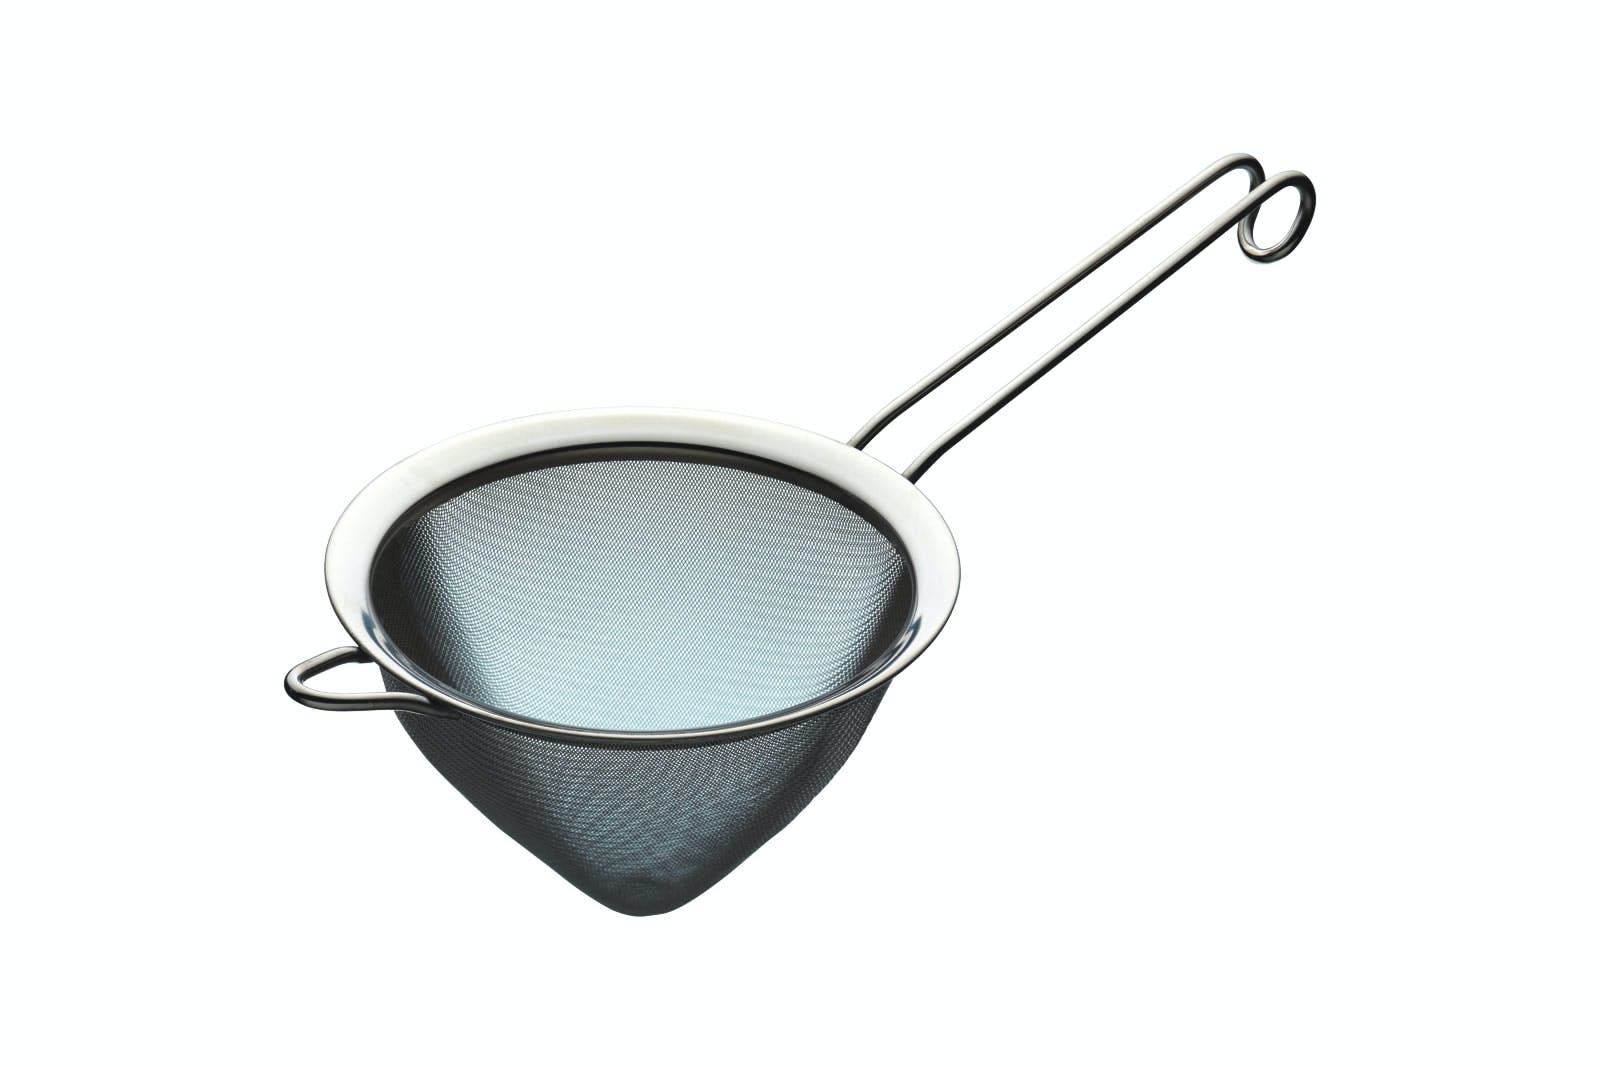 KitchenCraft Stainless Steel 15cm Fine Mesh Conical Sieve - The Cooks Cupboard Ltd